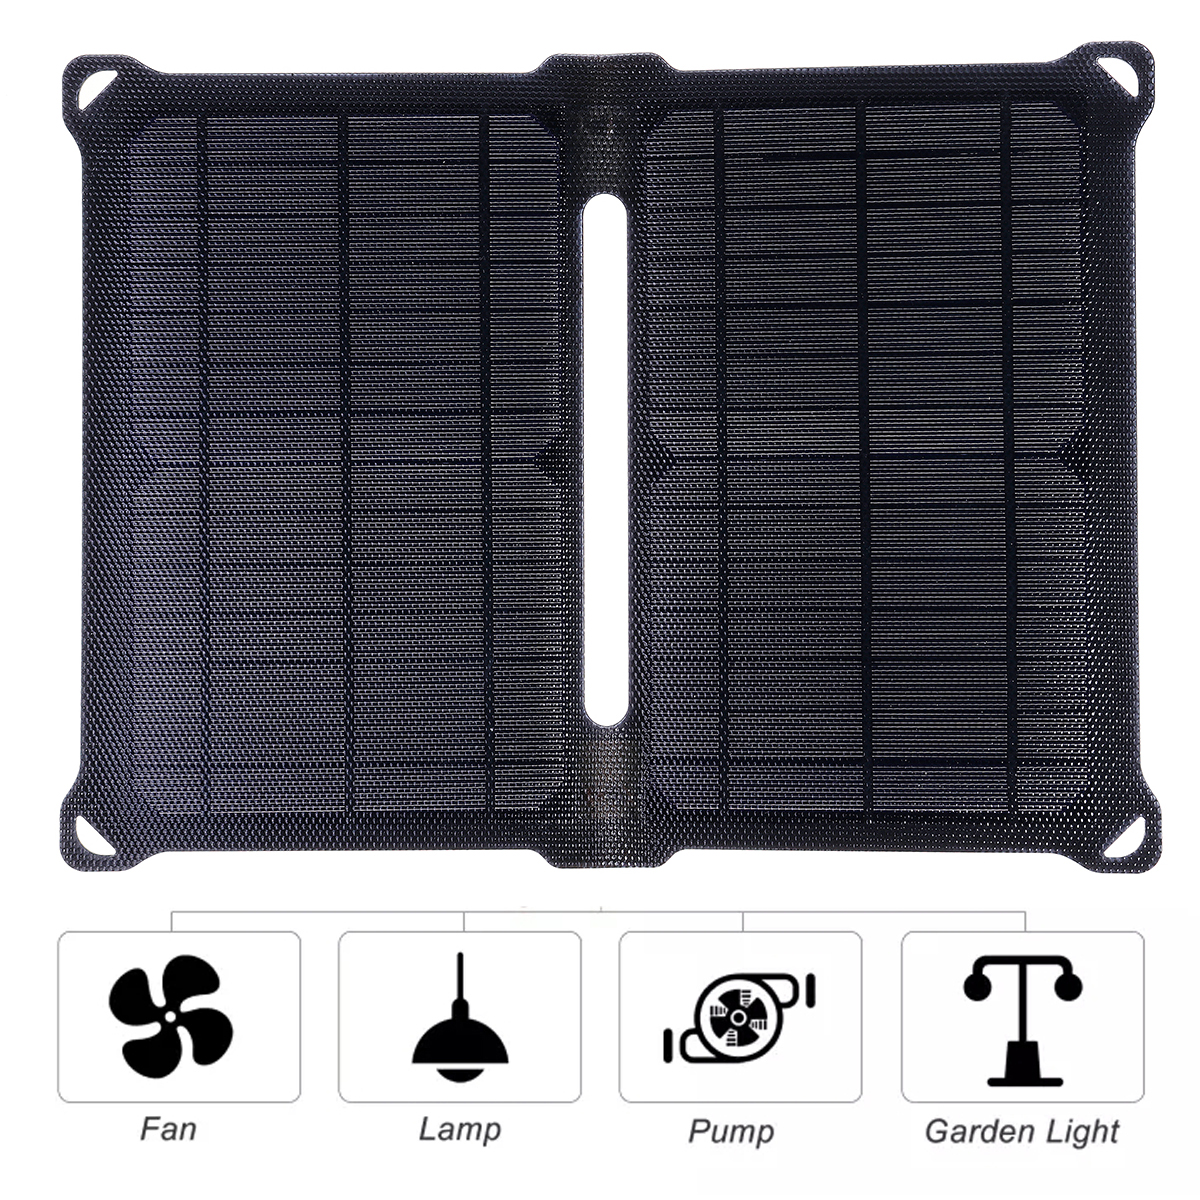 Foldable-Solar-Charger-Waterproof-ETFE-Monoctrystalline-Solar-Panel-Dual-USB-Ports-Outdoor-Camping-C-1935777-1